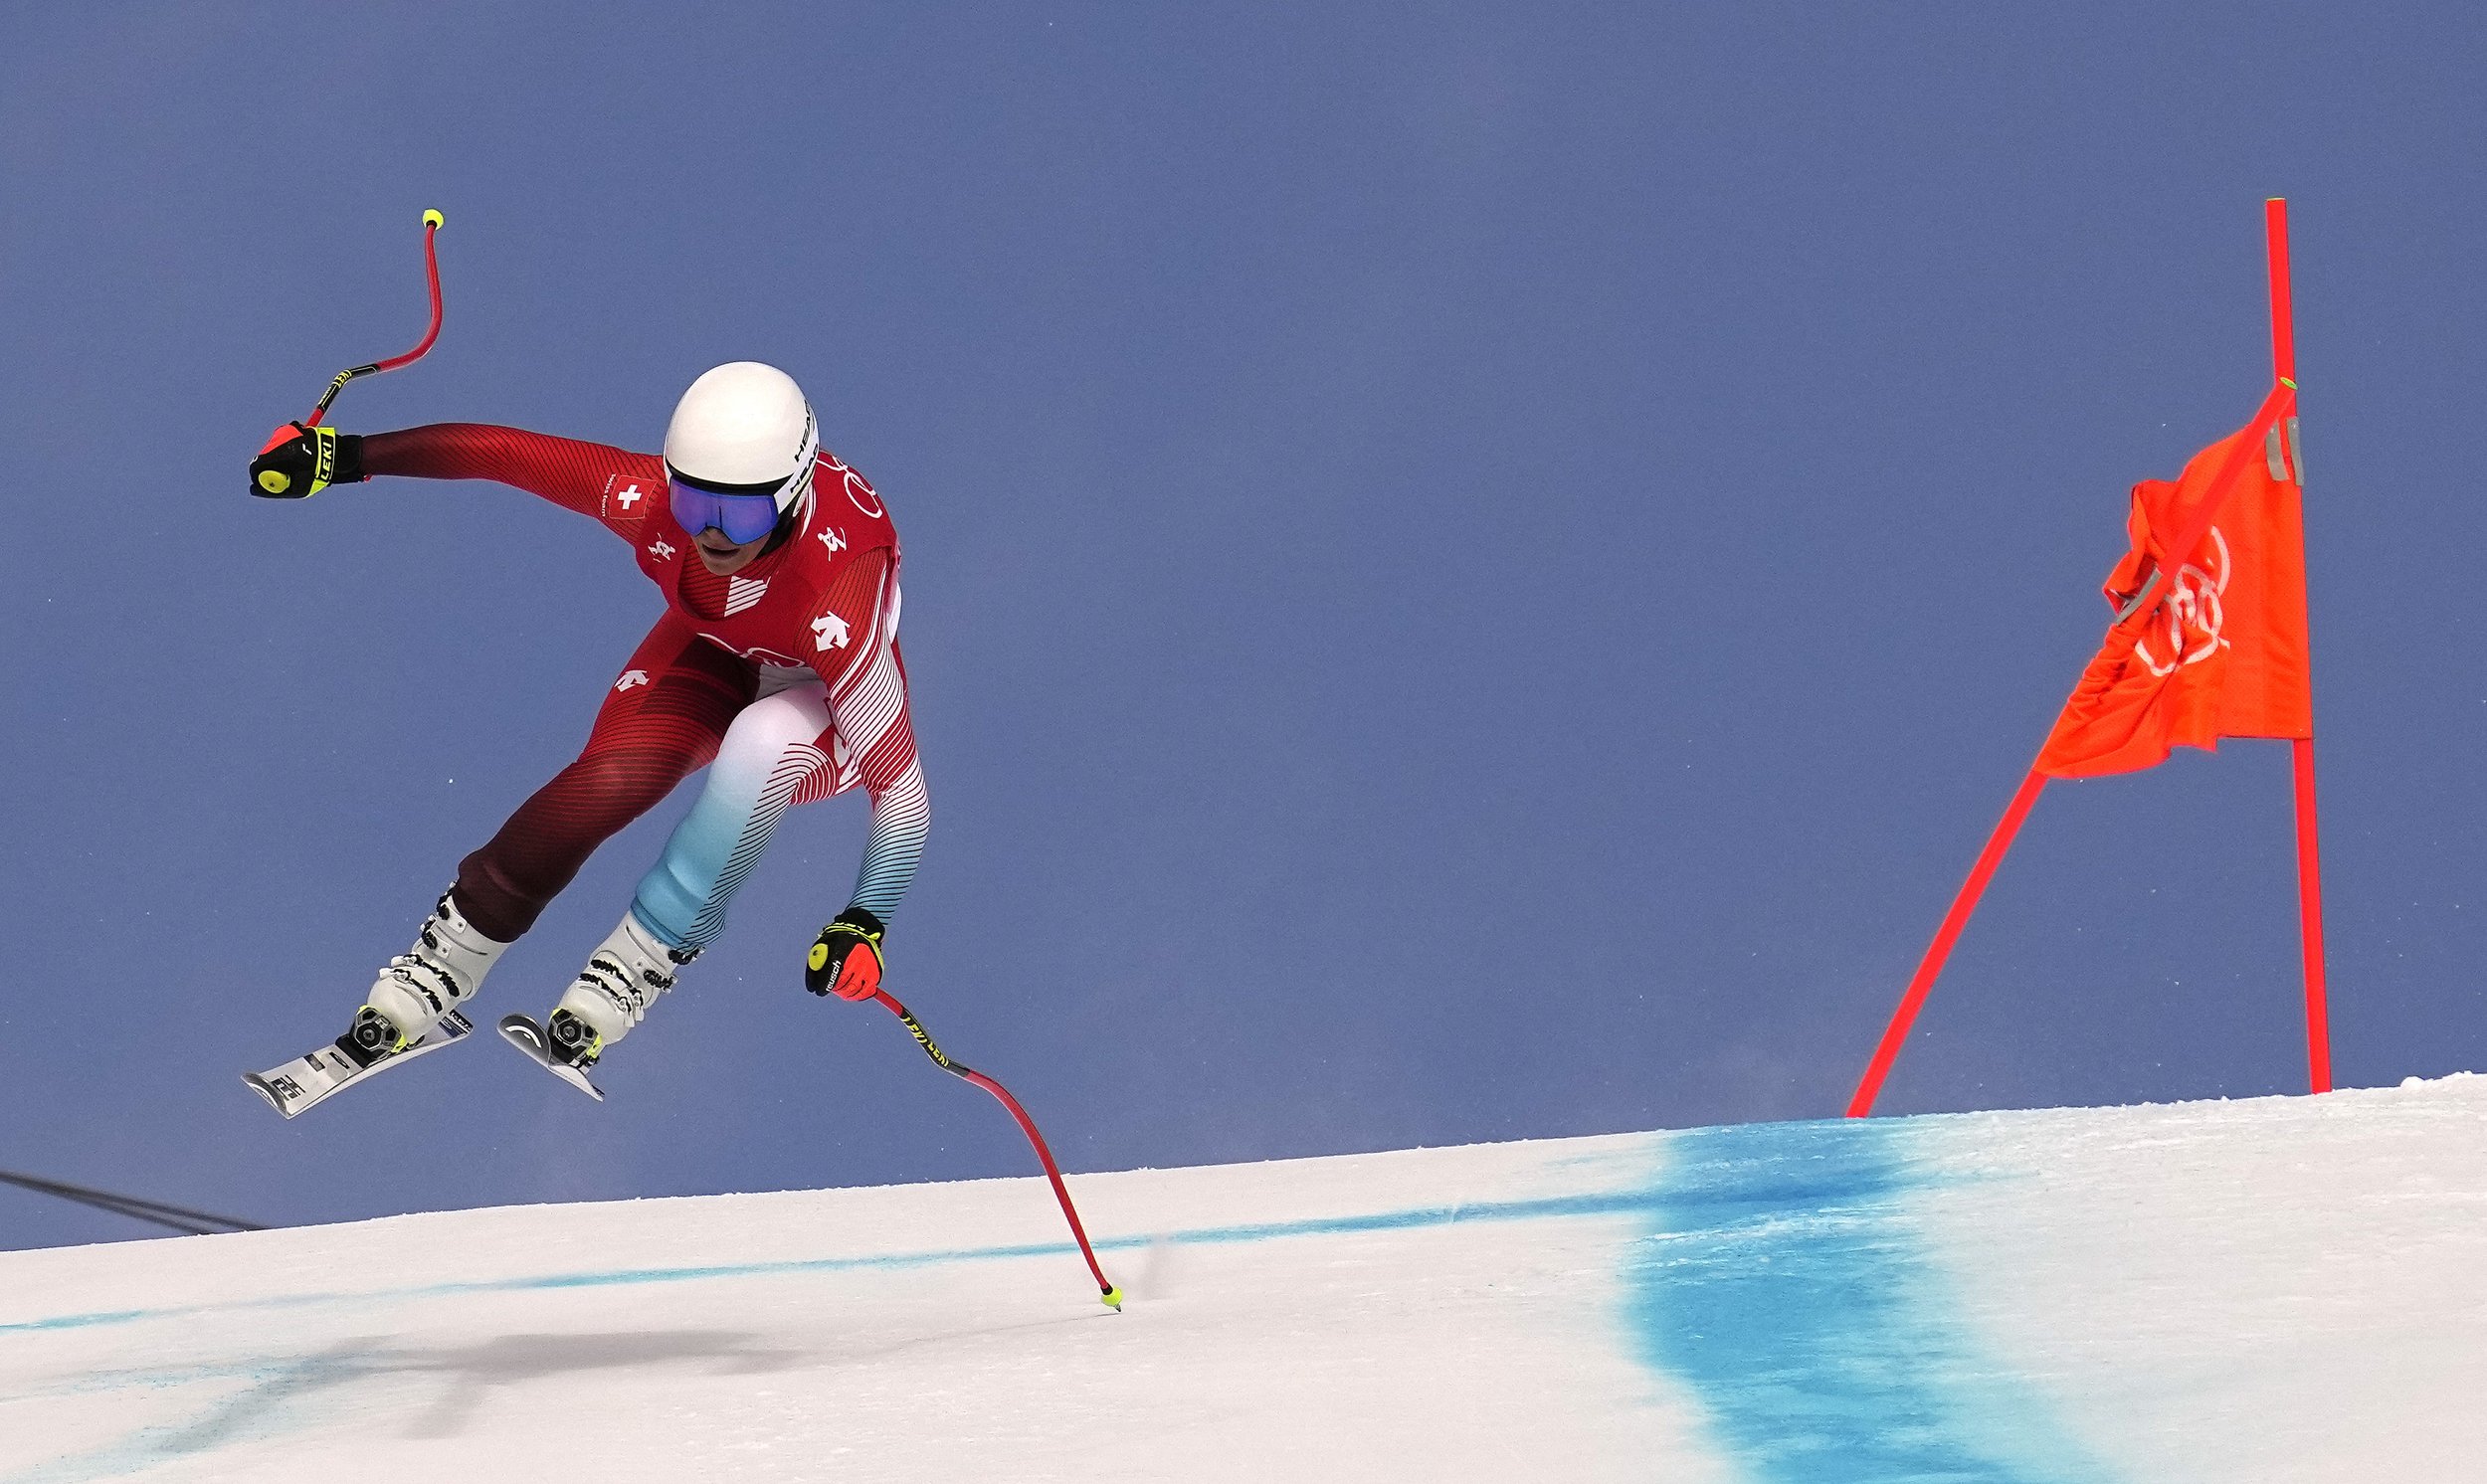  Corinne Suter, of Switzerland makes a jump during the women's downhill at the 2022 Winter Olympics, Tuesday, Feb. 15, 2022, in the Yanqing district of Beijing. (AP Photo/Robert F. Bukaty) 